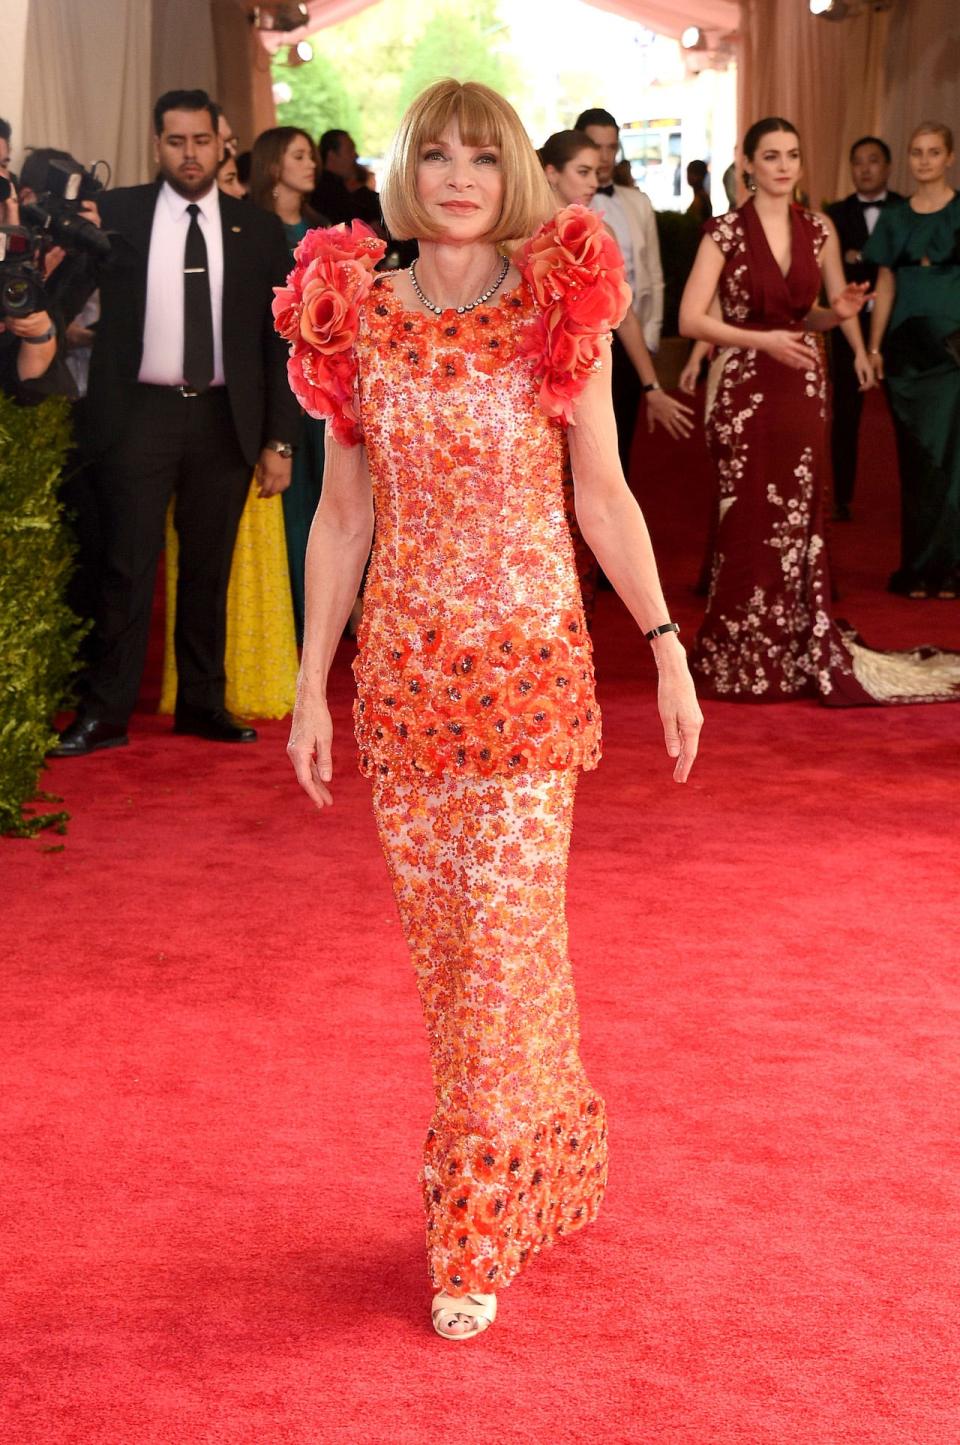 Anna Wintour at the 2015 Met Gala.